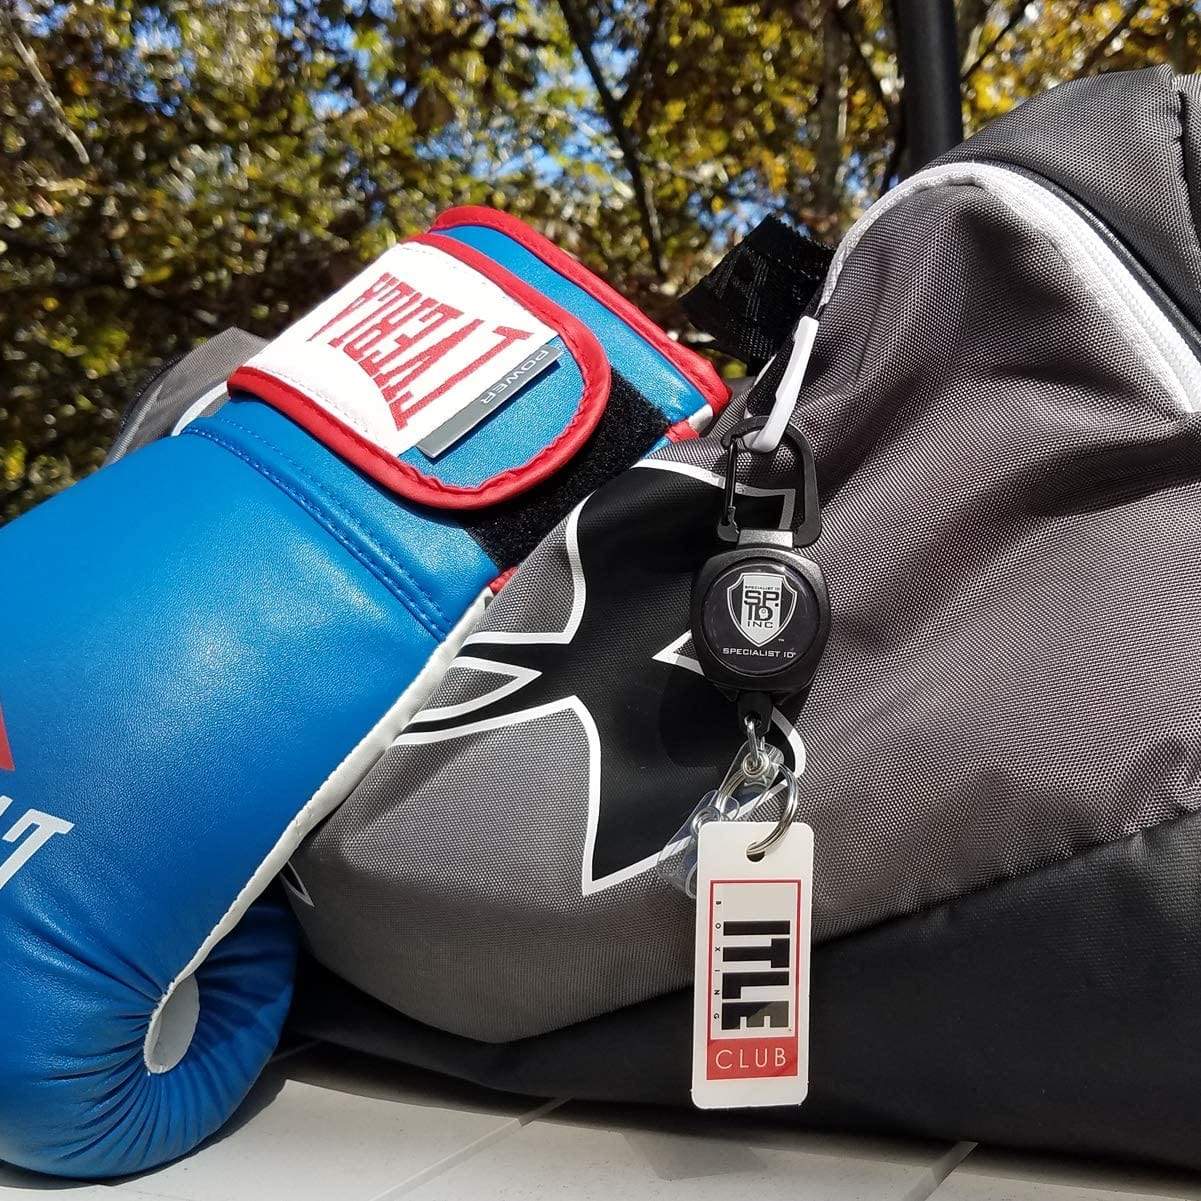 Close-up of a blue boxing glove resting on a gray Under Armour backpack with a Title Club gym lock attached, outdoors with tree leaves in the background. The bag also features an SPID Key-Bak SIDEKICK Heavy Duty Retractable Carabiner Badge Reel with ID Holder Strap & Keychain for securing accessories.